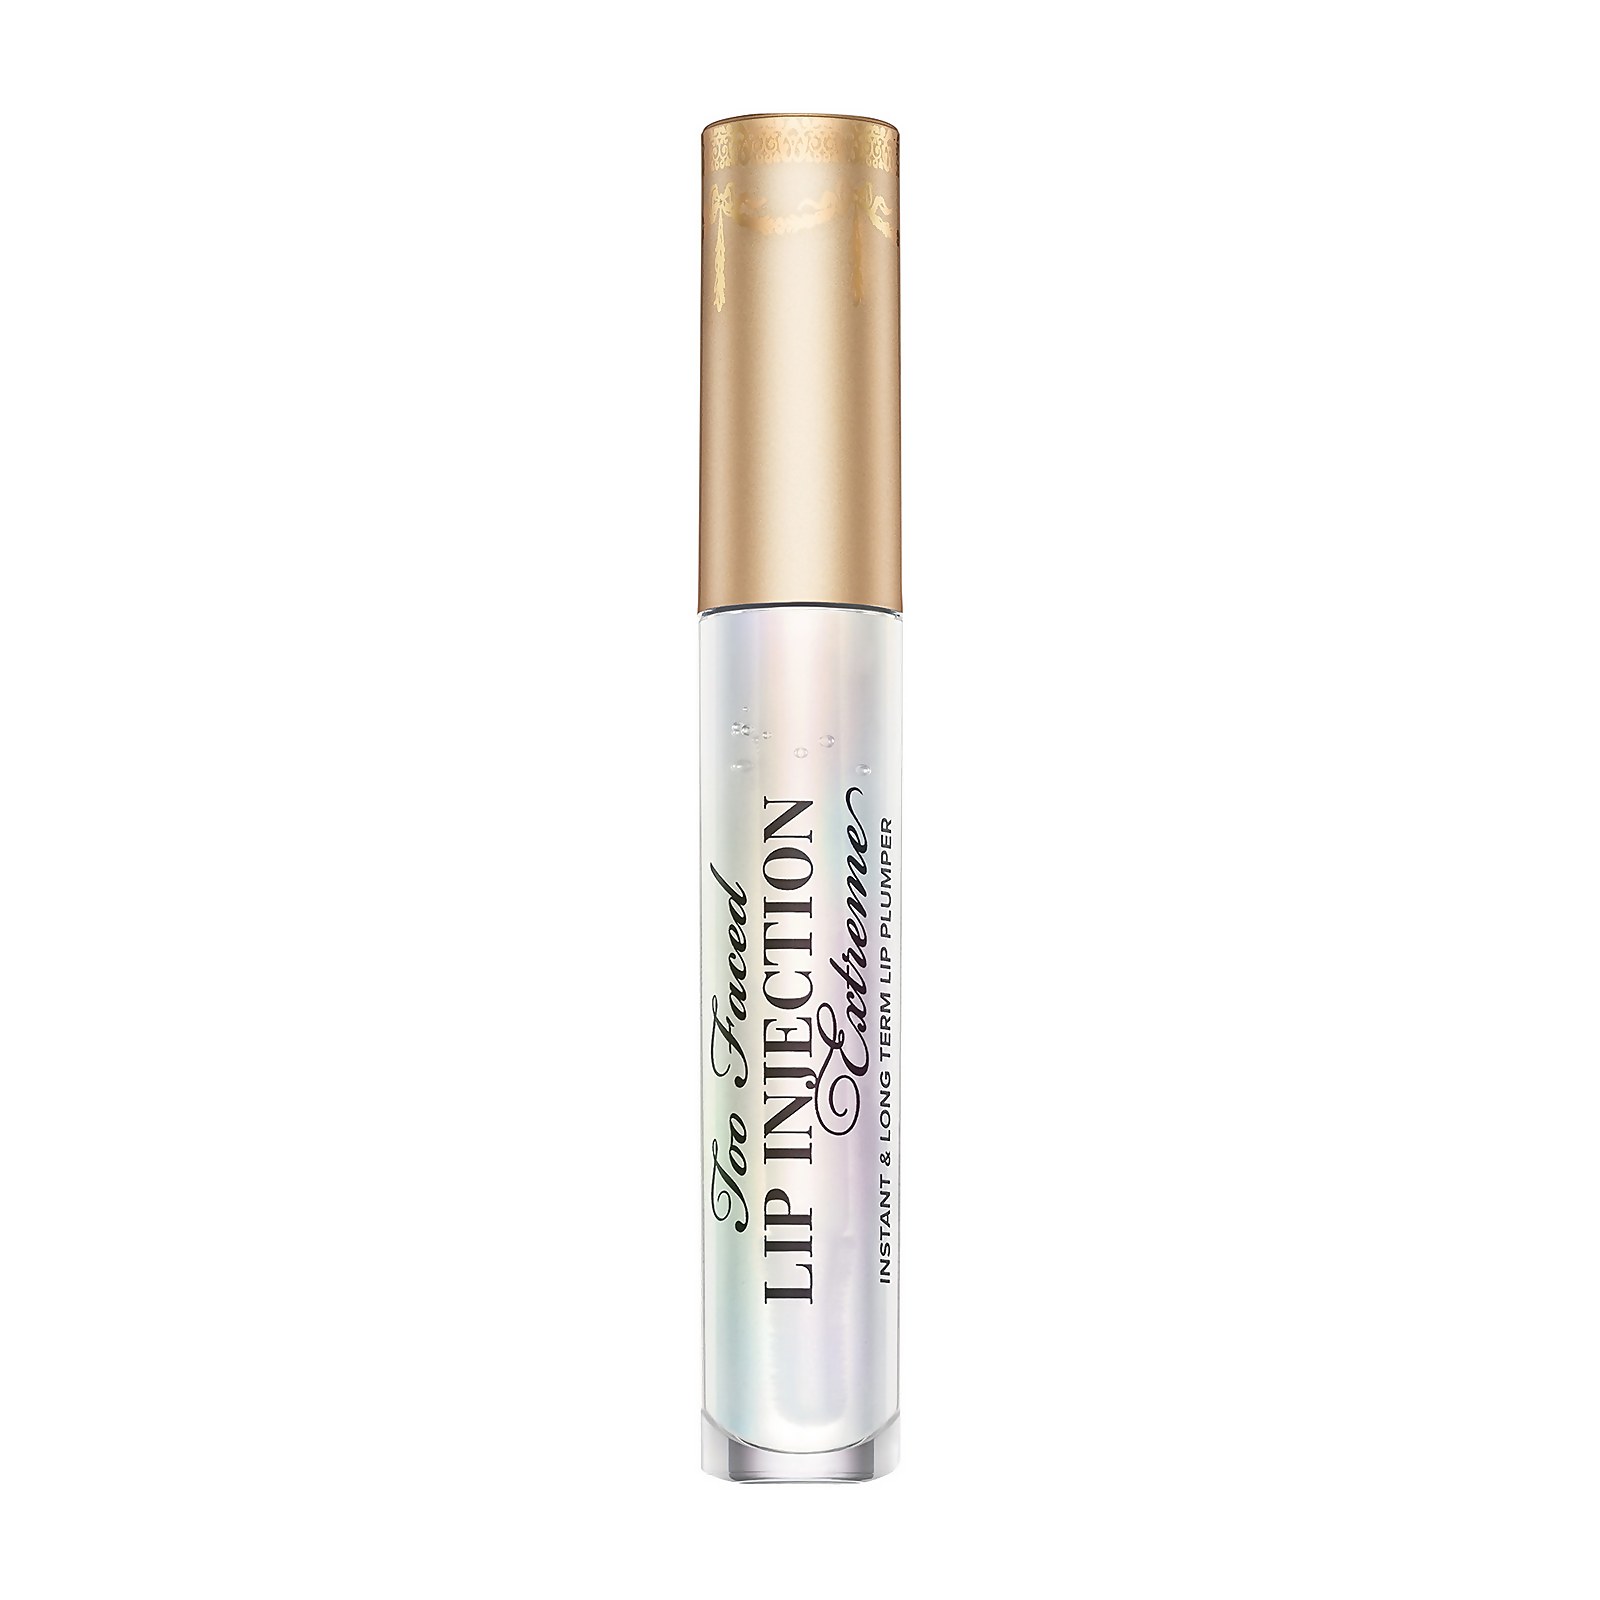 Too Faced Lip Injection Extreme Lip Gloss 4ml